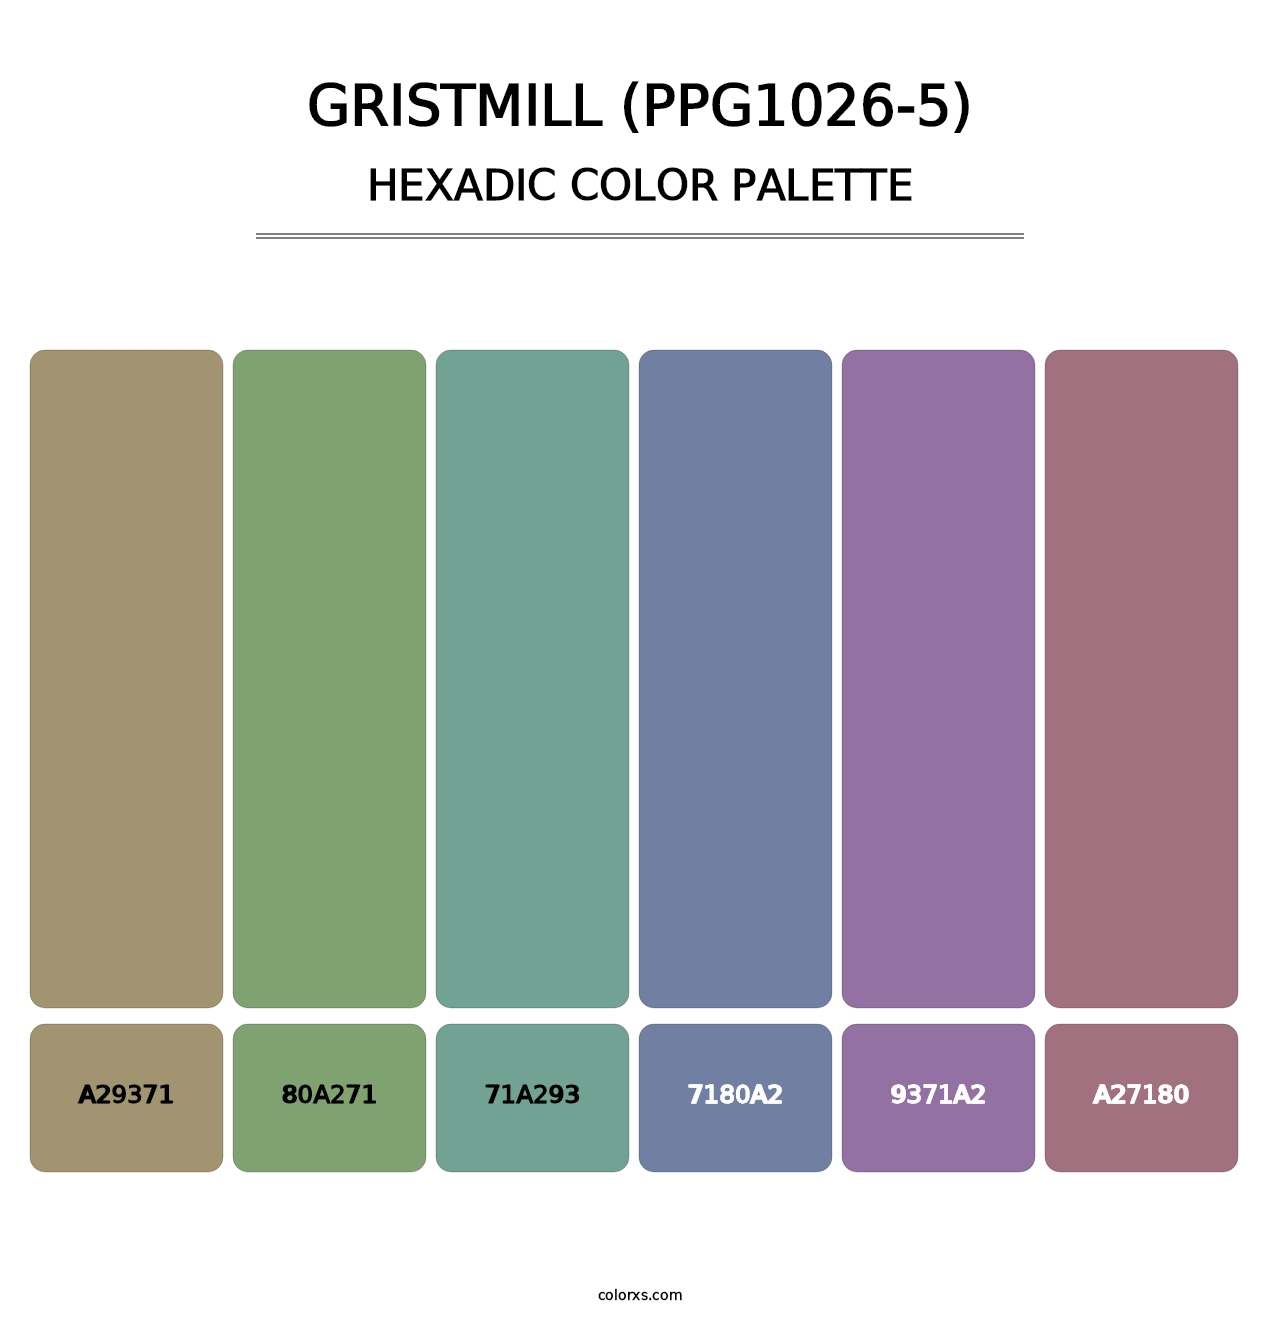 Gristmill (PPG1026-5) - Hexadic Color Palette